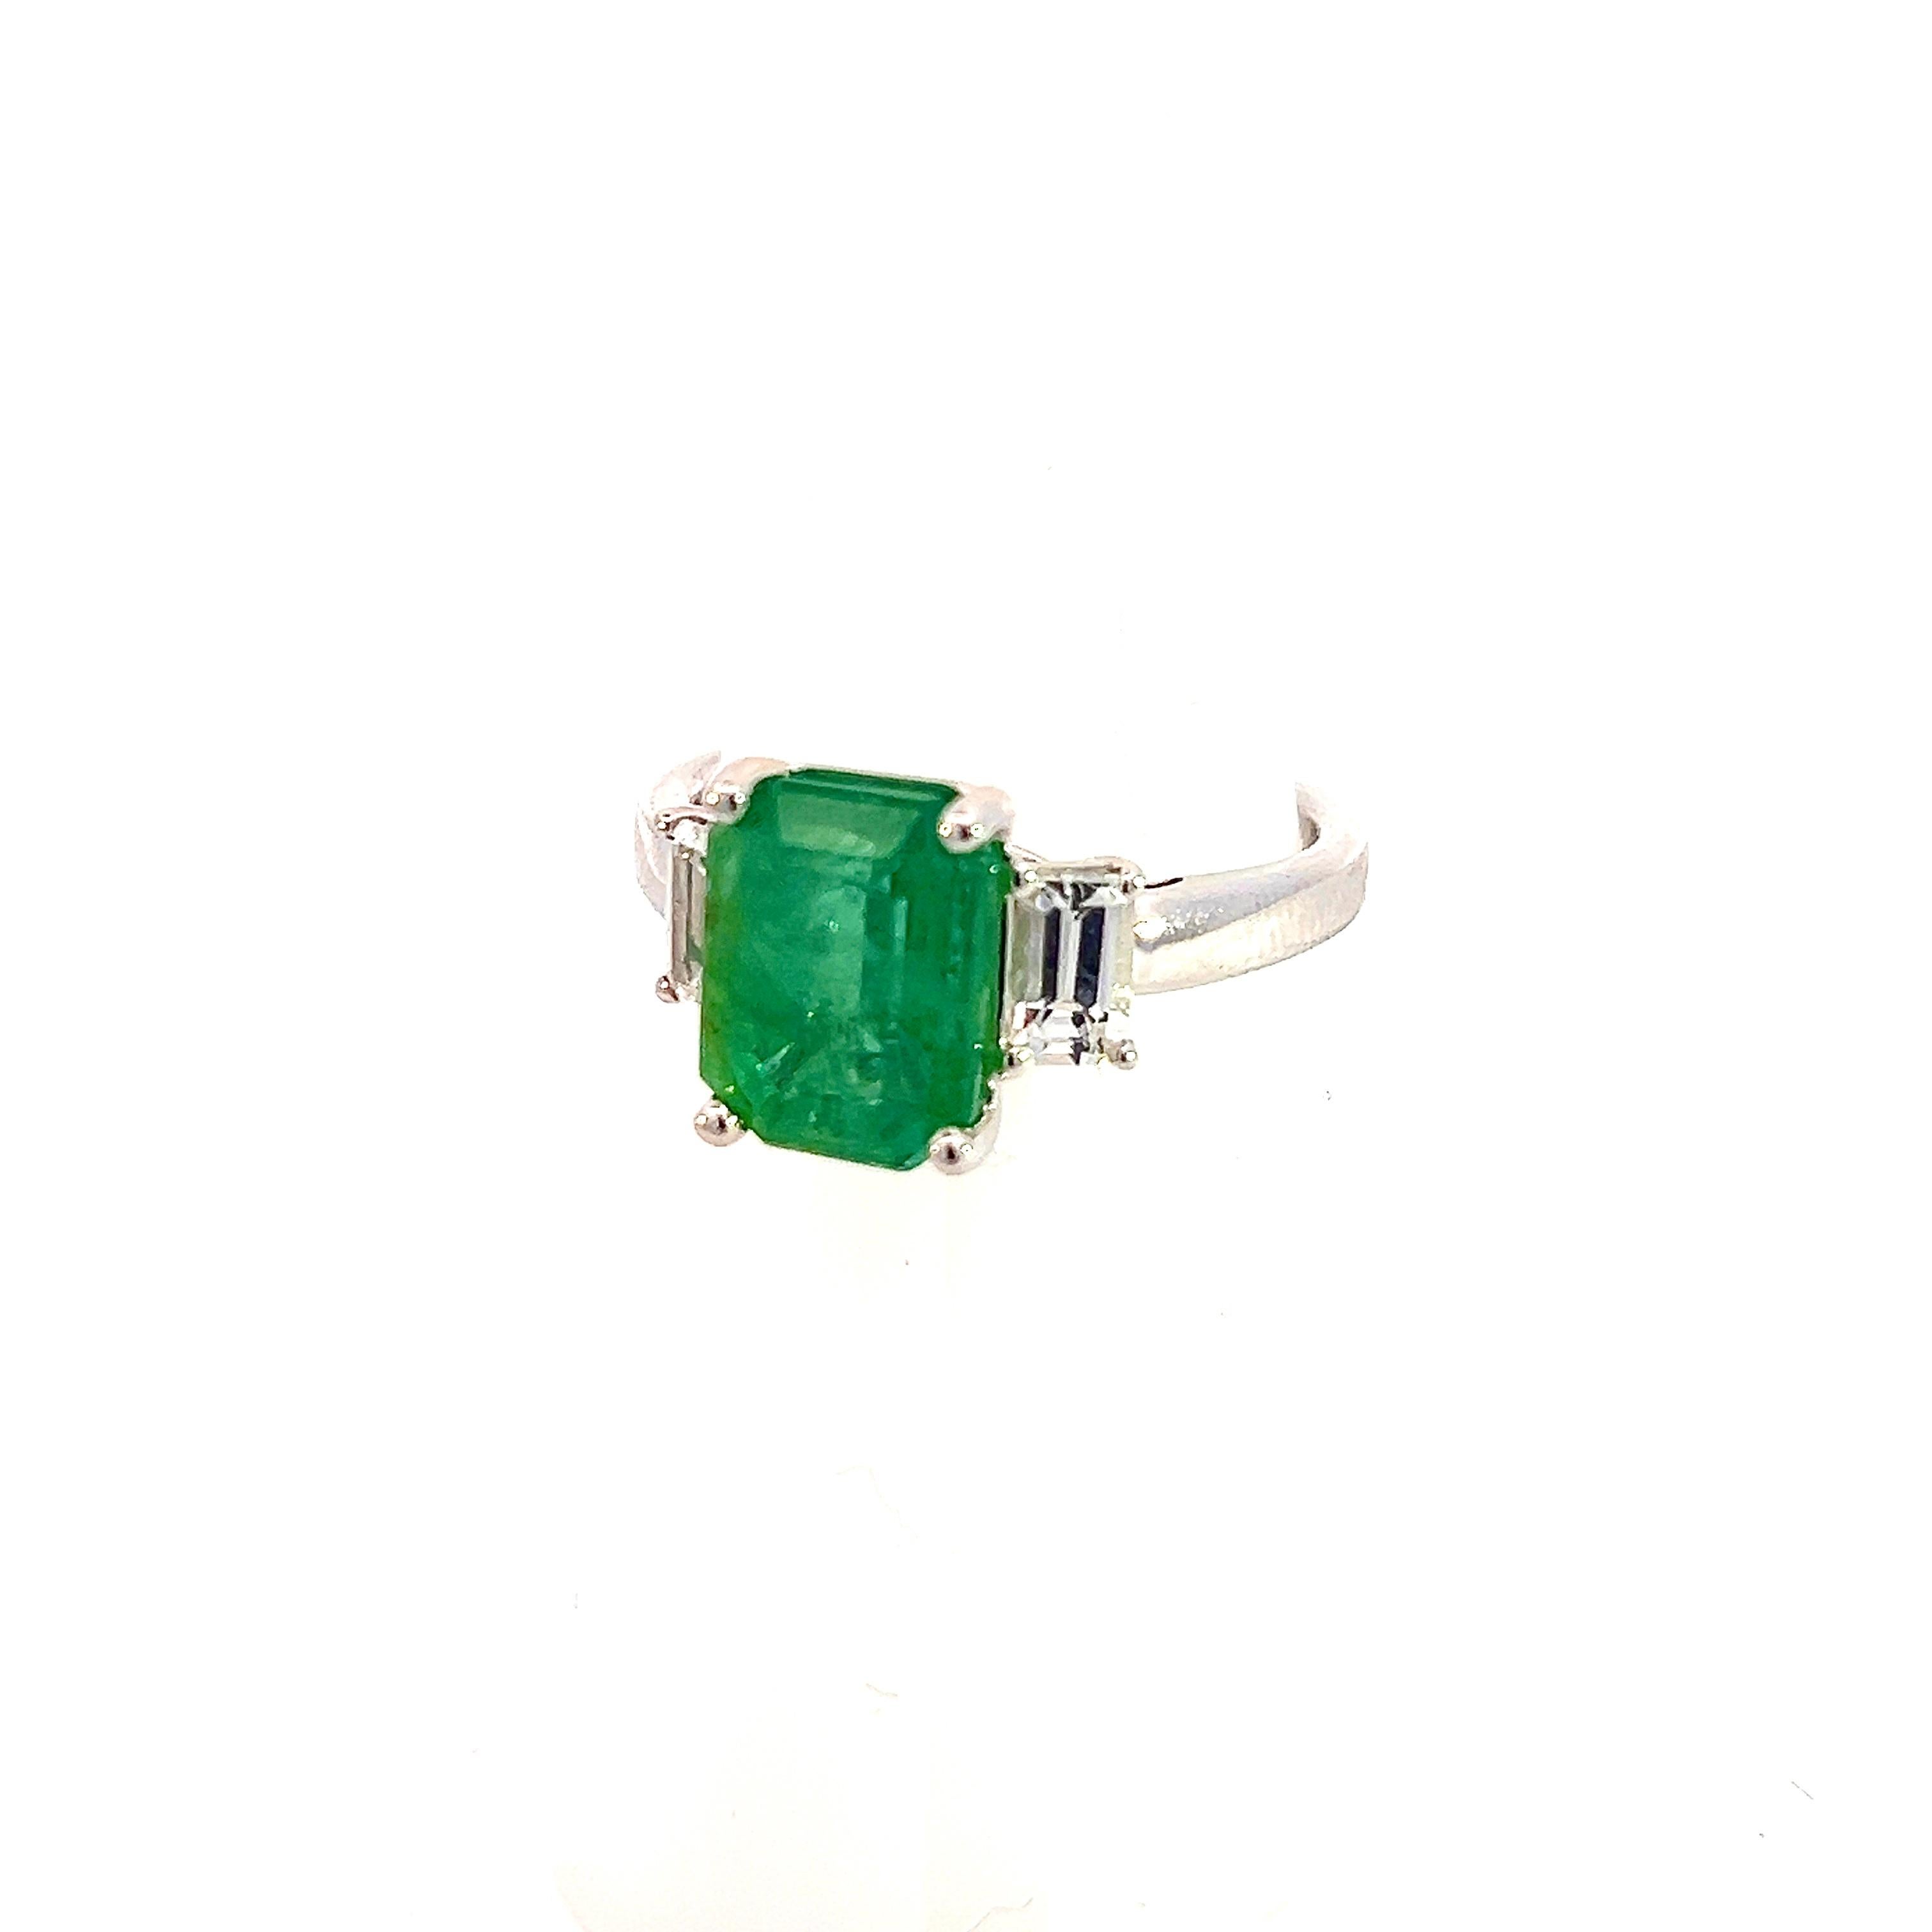 Natural Emerald Sapphire Ring 6.25 14k White Gold 3.49 TCW Certified  For Sale 5